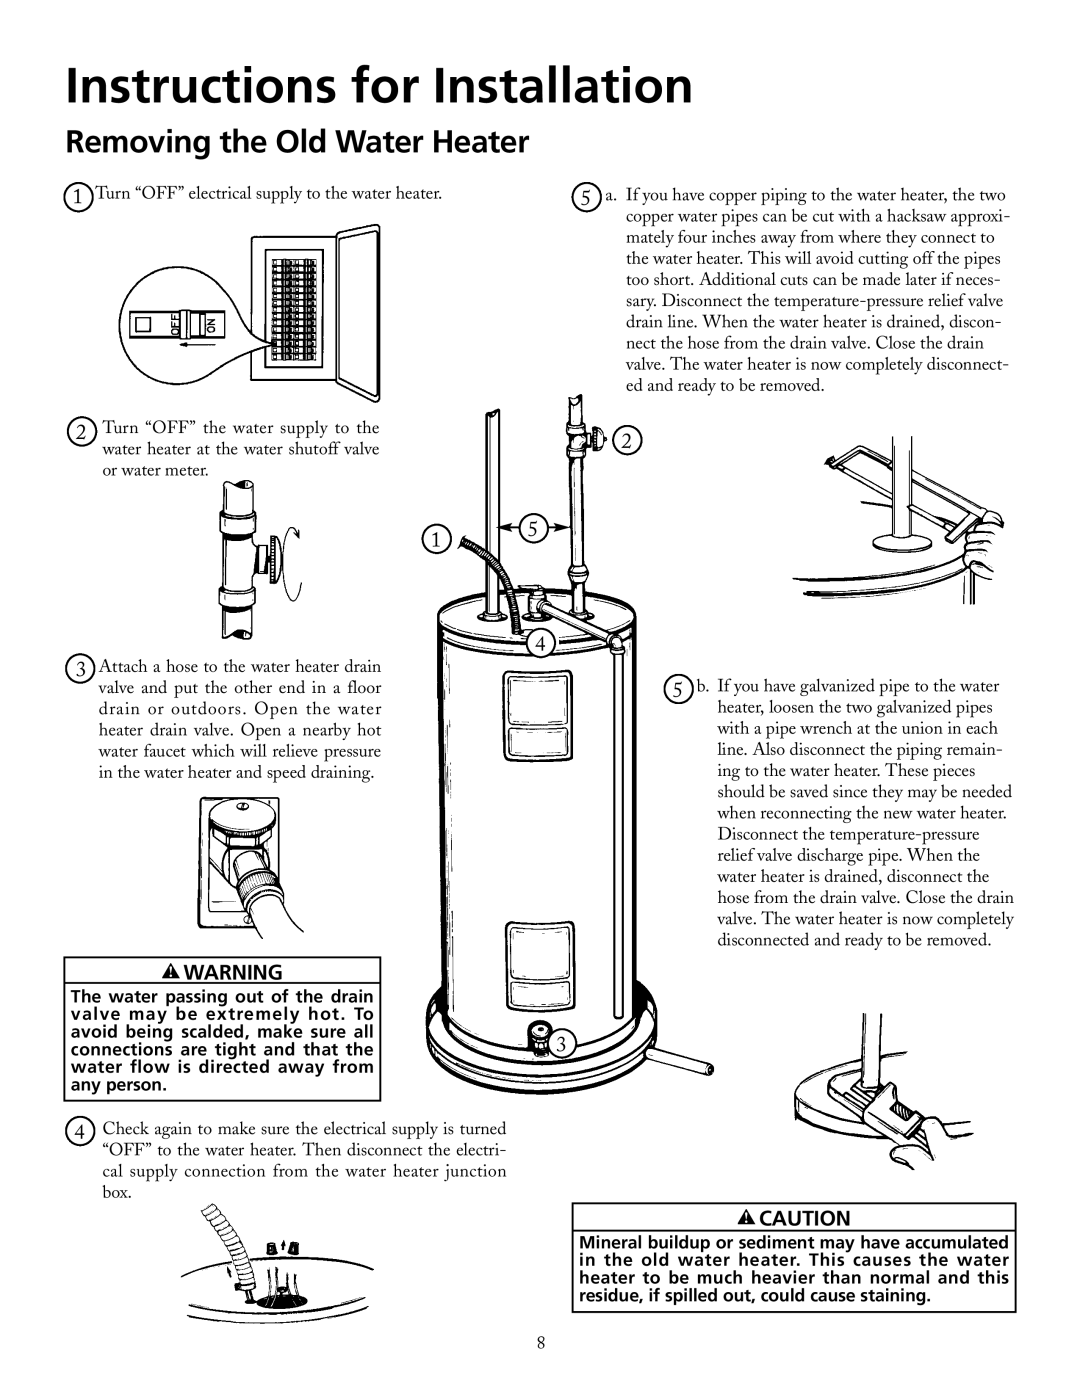 Maytag HRX52DERT, HRX30DERT, HRX66DERT, HRX52DERS, HRX40DERT Instructions for Installation, Removing the Old Water Heater 